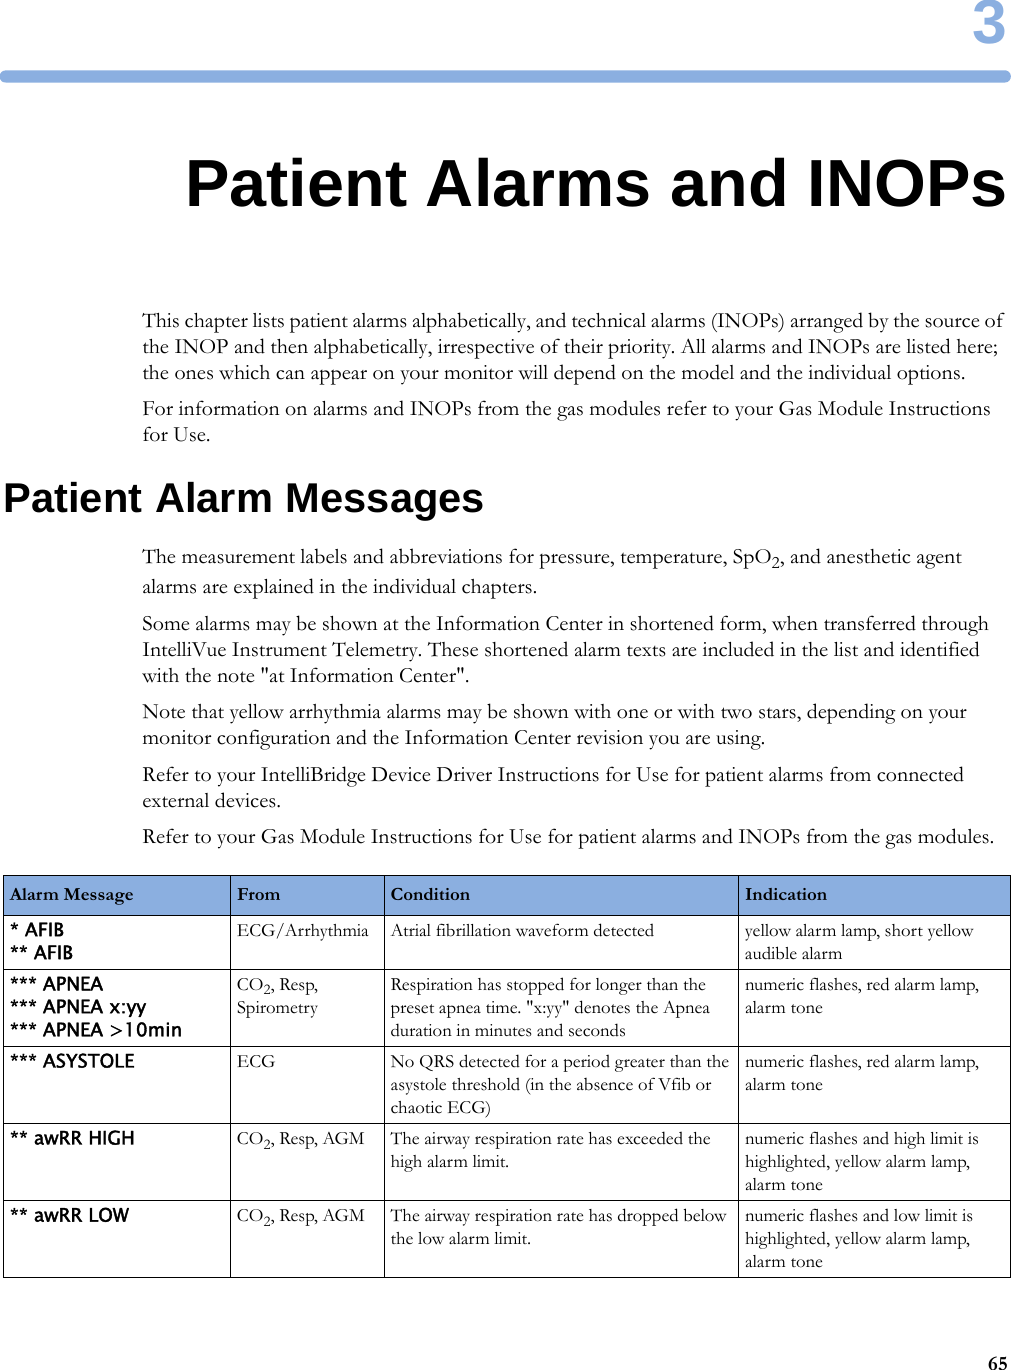 3653Patient Alarms and INOPsThis chapter lists patient alarms alphabetically, and technical alarms (INOPs) arranged by the source of the INOP and then alphabetically, irrespective of their priority. All alarms and INOPs are listed here; the ones which can appear on your monitor will depend on the model and the individual options.For information on alarms and INOPs from the gas modules refer to your Gas Module Instructions for Use.Patient Alarm MessagesThe measurement labels and abbreviations for pressure, temperature, SpO2, and anesthetic agent alarms are explained in the individual chapters. Some alarms may be shown at the Information Center in shortened form, when transferred through IntelliVue Instrument Telemetry. These shortened alarm texts are included in the list and identified with the note &quot;at Information Center&quot;.Note that yellow arrhythmia alarms may be shown with one or with two stars, depending on your monitor configuration and the Information Center revision you are using.Refer to your IntelliBridge Device Driver Instructions for Use for patient alarms from connected external devices.Refer to your Gas Module Instructions for Use for patient alarms and INOPs from the gas modules.Alarm Message From Condition Indication* AFIB** AFIBECG/Arrhythmia Atrial fibrillation waveform detected yellow alarm lamp, short yellow audible alarm*** APNEA*** APNEA x:yy*** APNEA &gt;10minCO2, Resp, SpirometryRespiration has stopped for longer than the preset apnea time. &quot;x:yy&quot; denotes the Apnea duration in minutes and secondsnumeric flashes, red alarm lamp, alarm tone*** ASYSTOLE ECG No QRS detected for a period greater than the asystole threshold (in the absence of Vfib or chaotic ECG)numeric flashes, red alarm lamp, alarm tone** awRR HIGH CO2, Resp, AGM The airway respiration rate has exceeded the high alarm limit.numeric flashes and high limit is highlighted, yellow alarm lamp, alarm tone** awRR LOW CO2, Resp, AGM The airway respiration rate has dropped below the low alarm limit.numeric flashes and low limit is highlighted, yellow alarm lamp, alarm tone